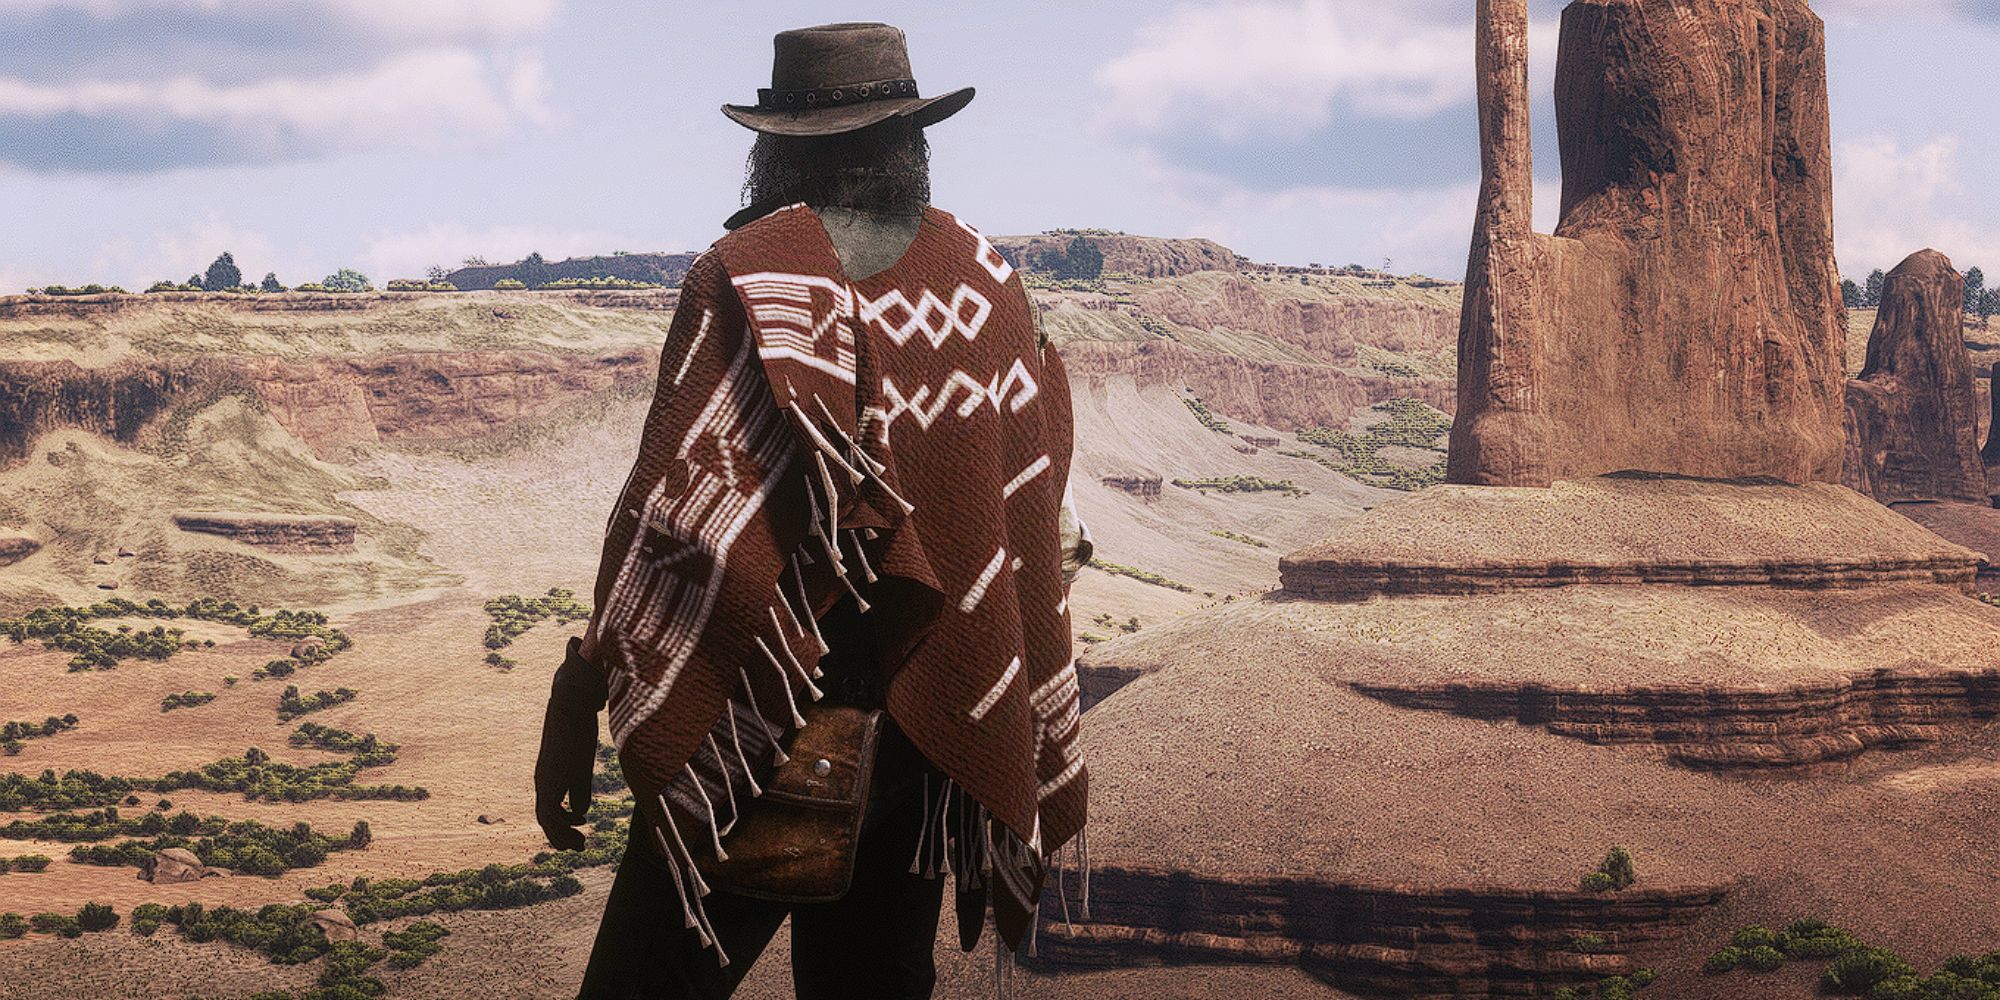 A clothing mod for Red Dead Redemption 2 that adds a brown poncho with white accents.